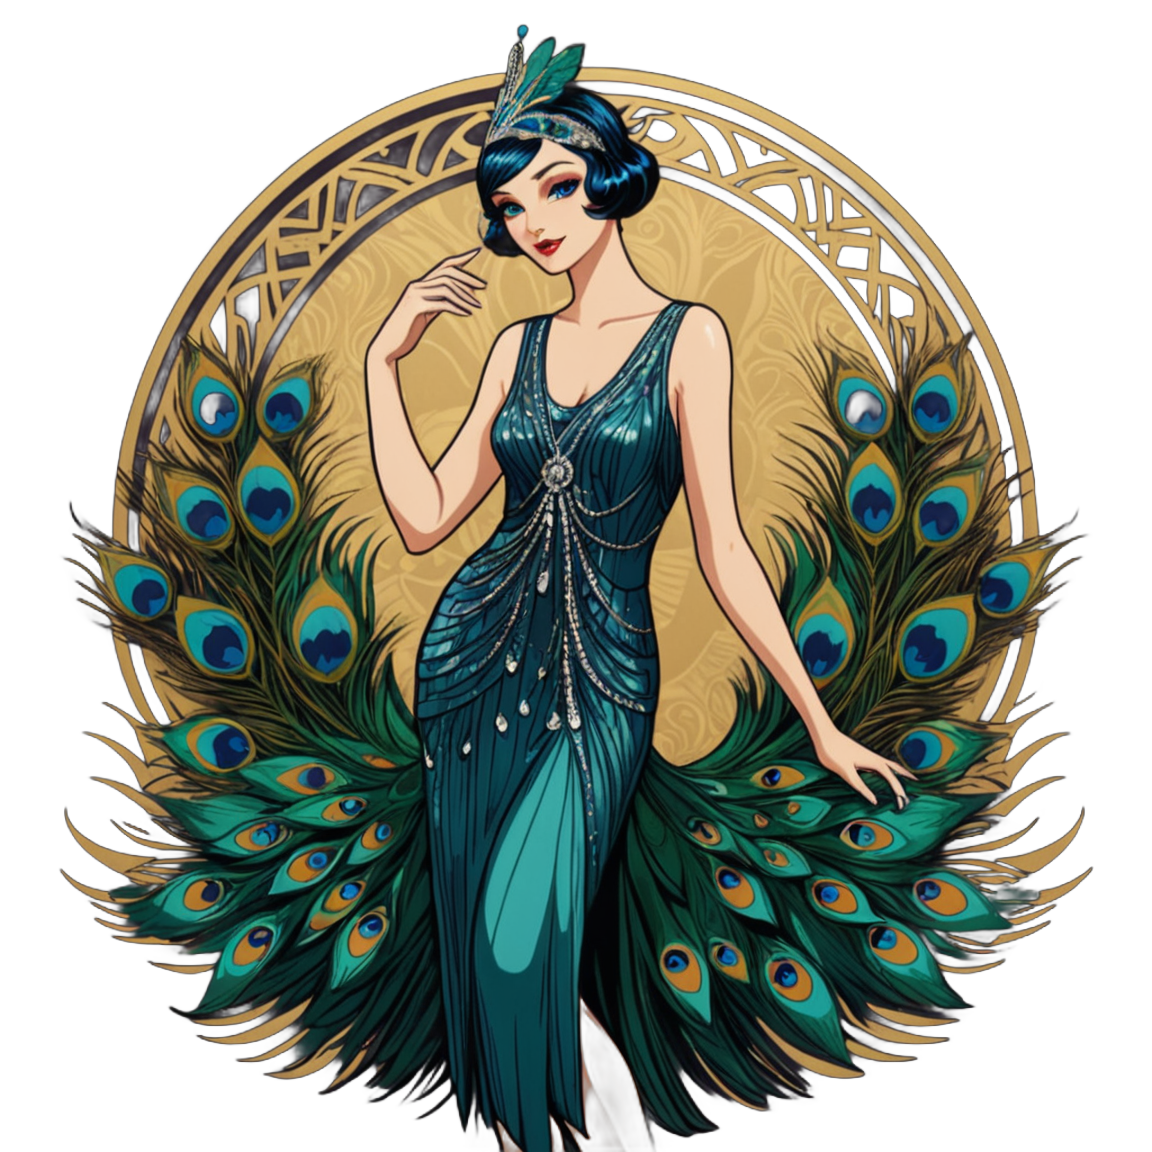 A 1920s flapper reimagined as a peacock, feathers flowing into a dazzling art deco dress shimmering with speakeasy glamour